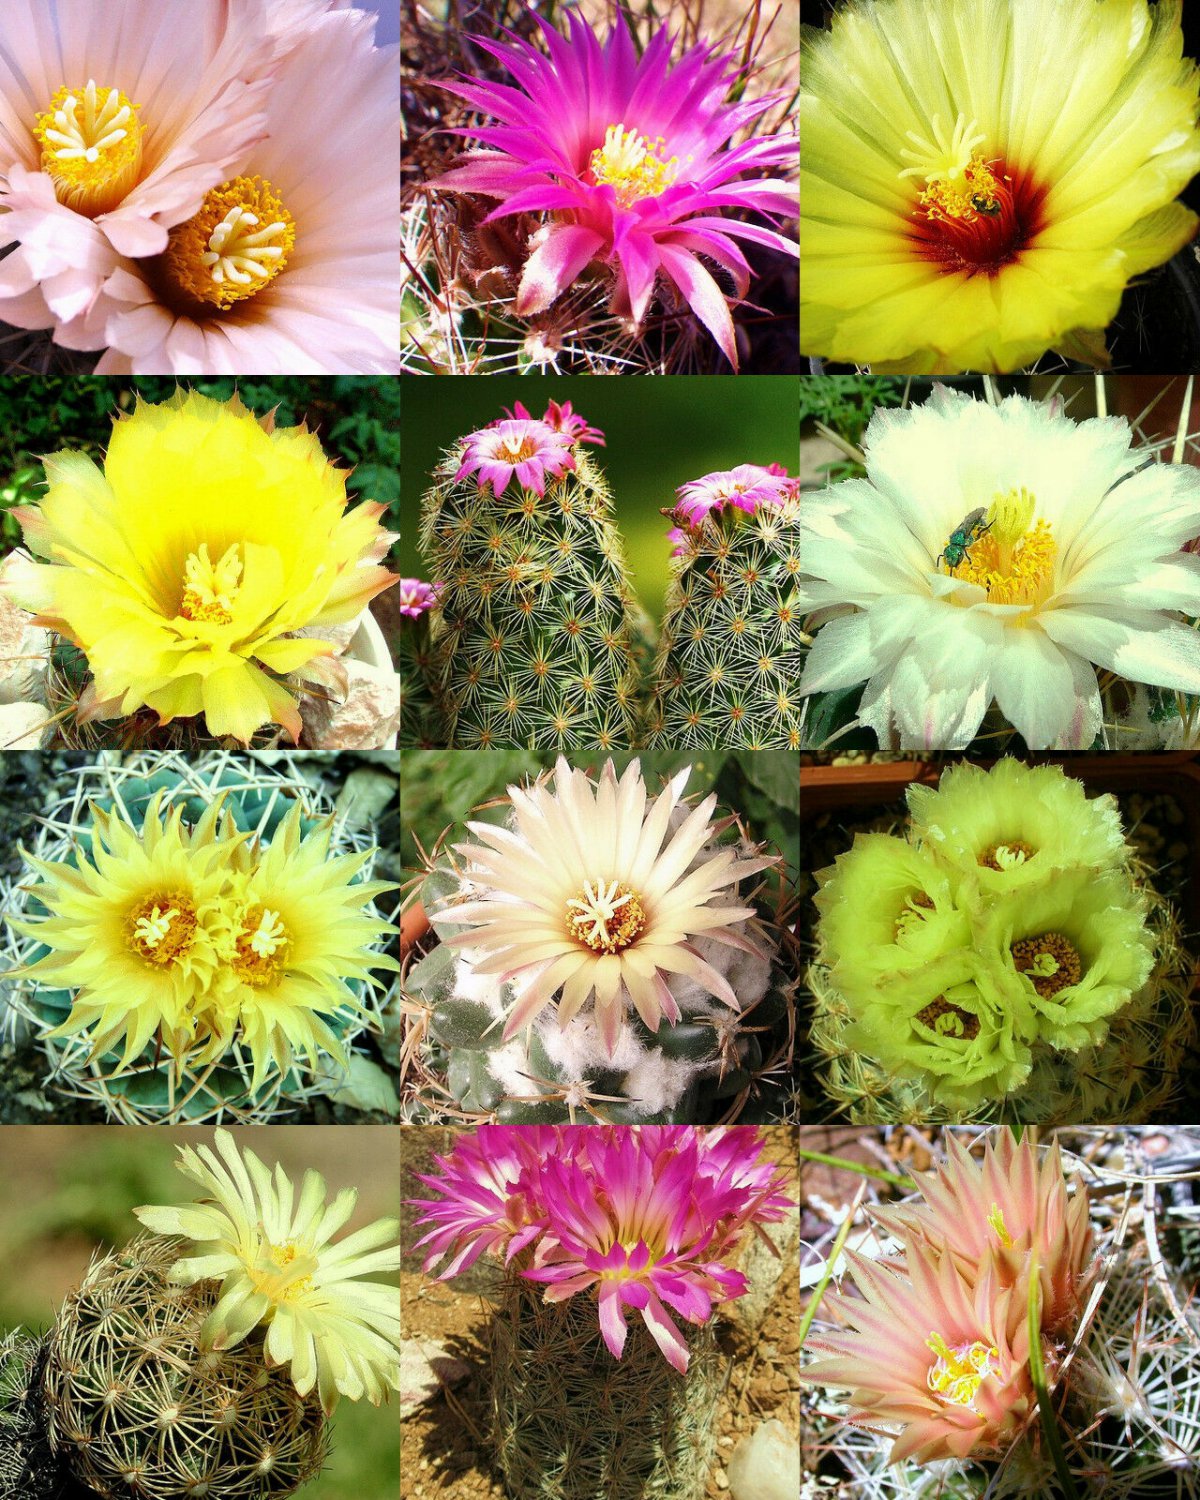 30 Seeds CORYPHANTHA MIX (Fragrant beehive cactus flower blooming cacti ...